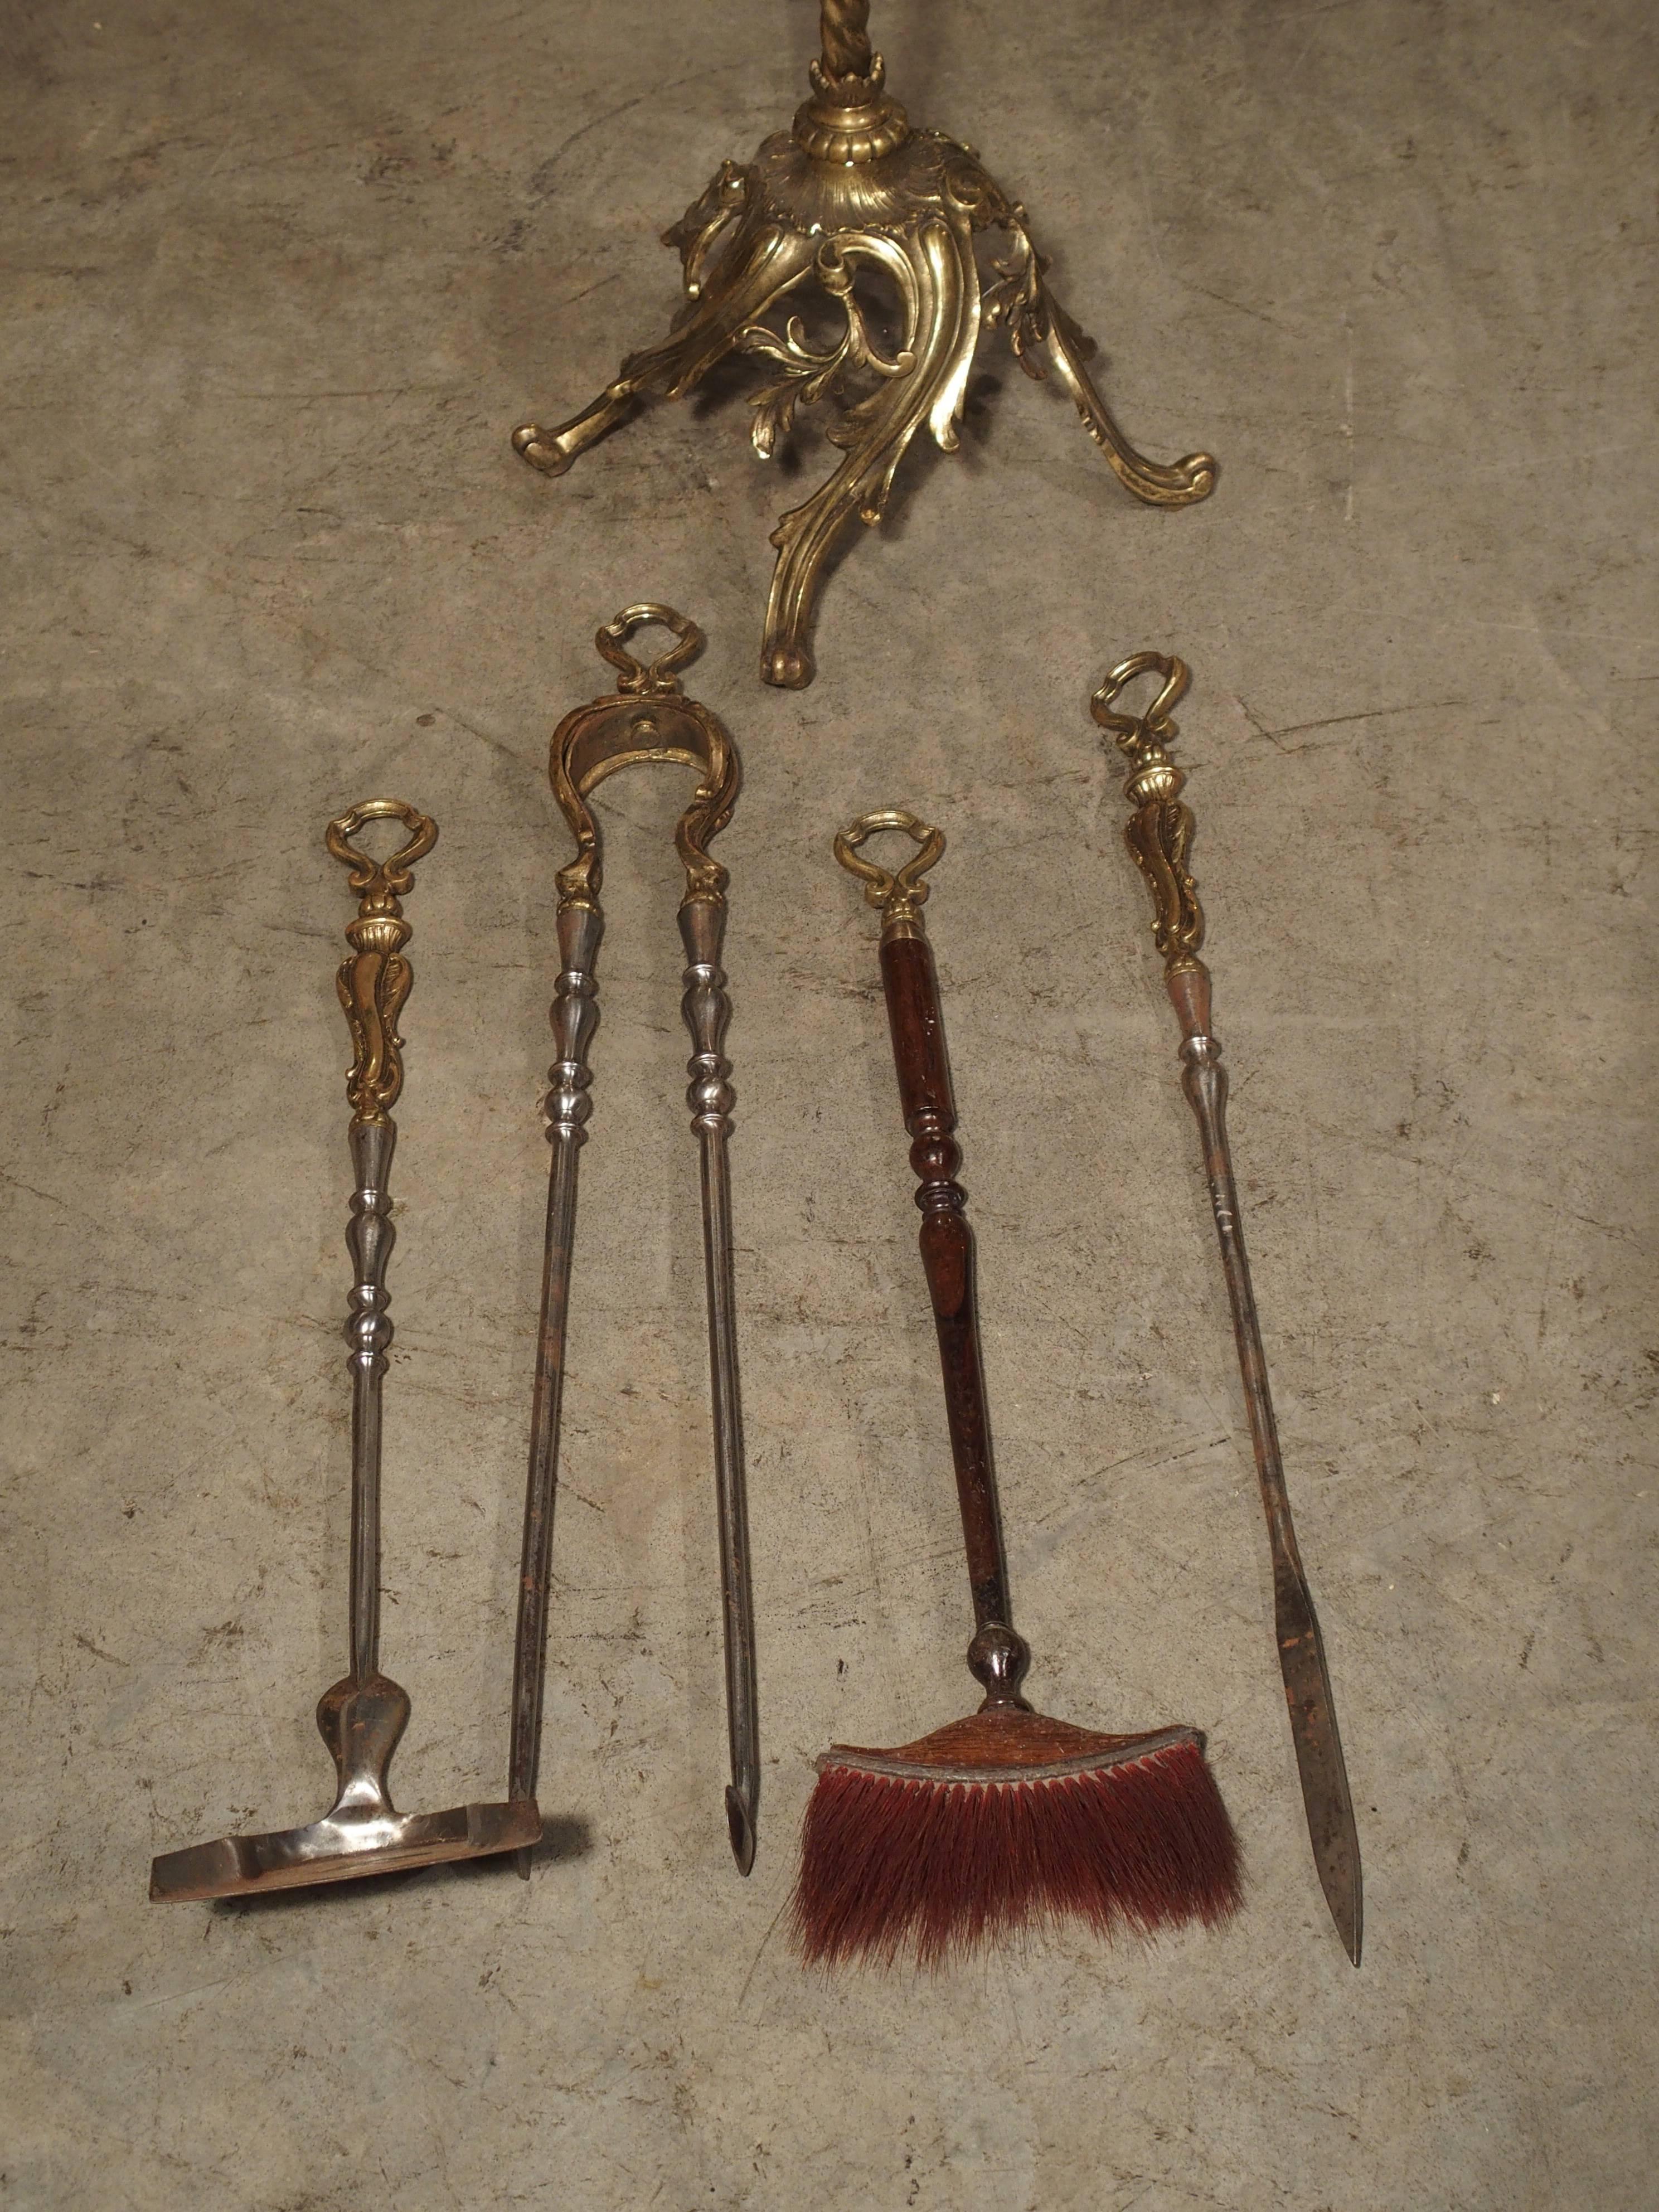 This complete set of French gilt bronze, wood and steel fireplace implements is from the 19th Century. The tops are all gilt bronze while the shafts are either wooden or steel. The bronze loops for hanging are the same ornate design on each tool. At